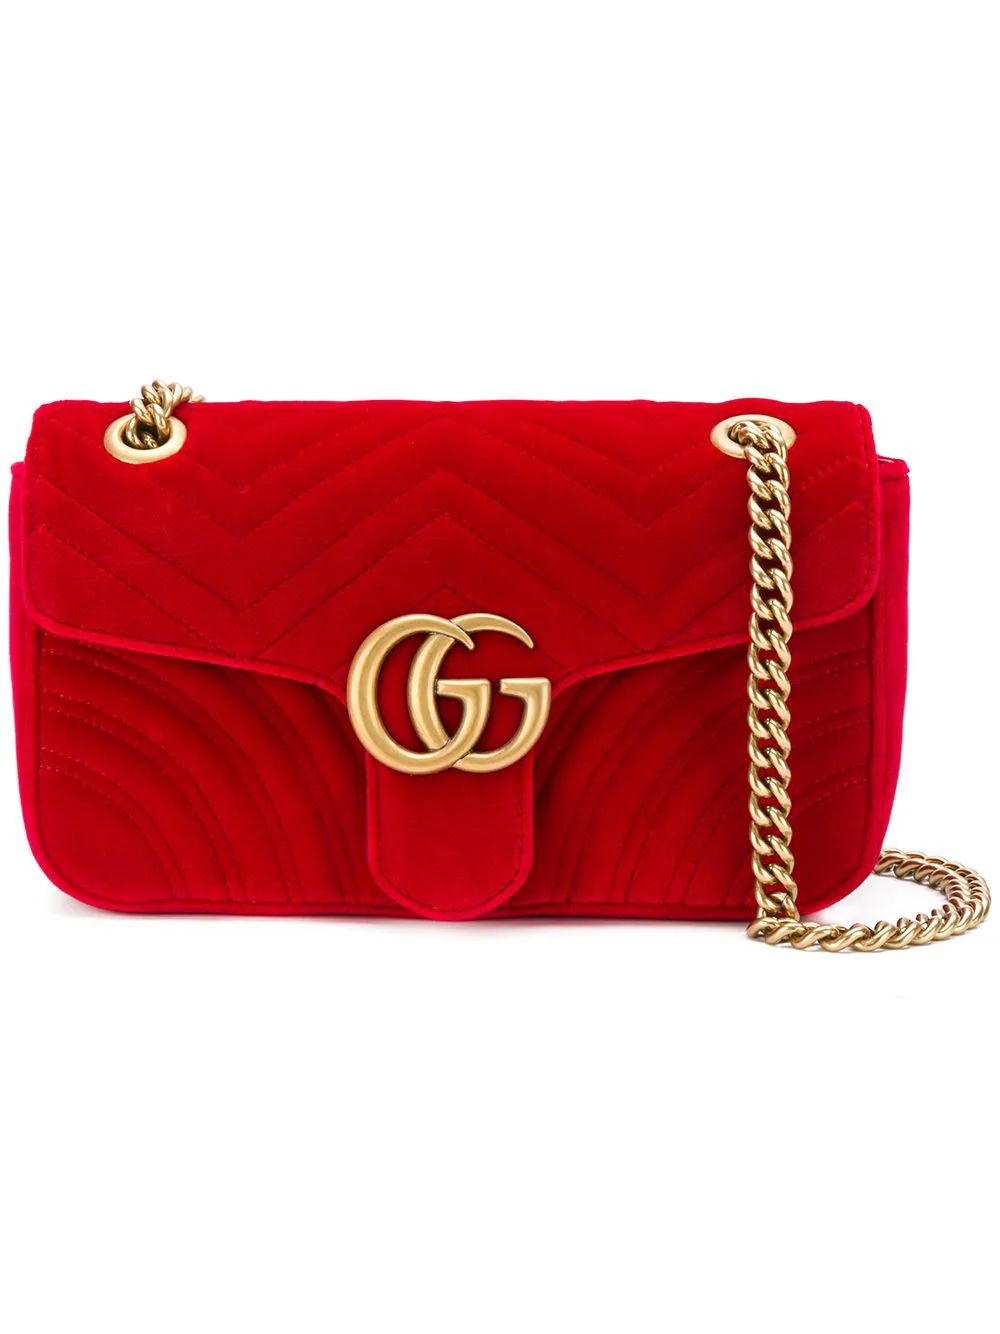 Gucci GG Marmont shoulder bag - Red | FarFetch US